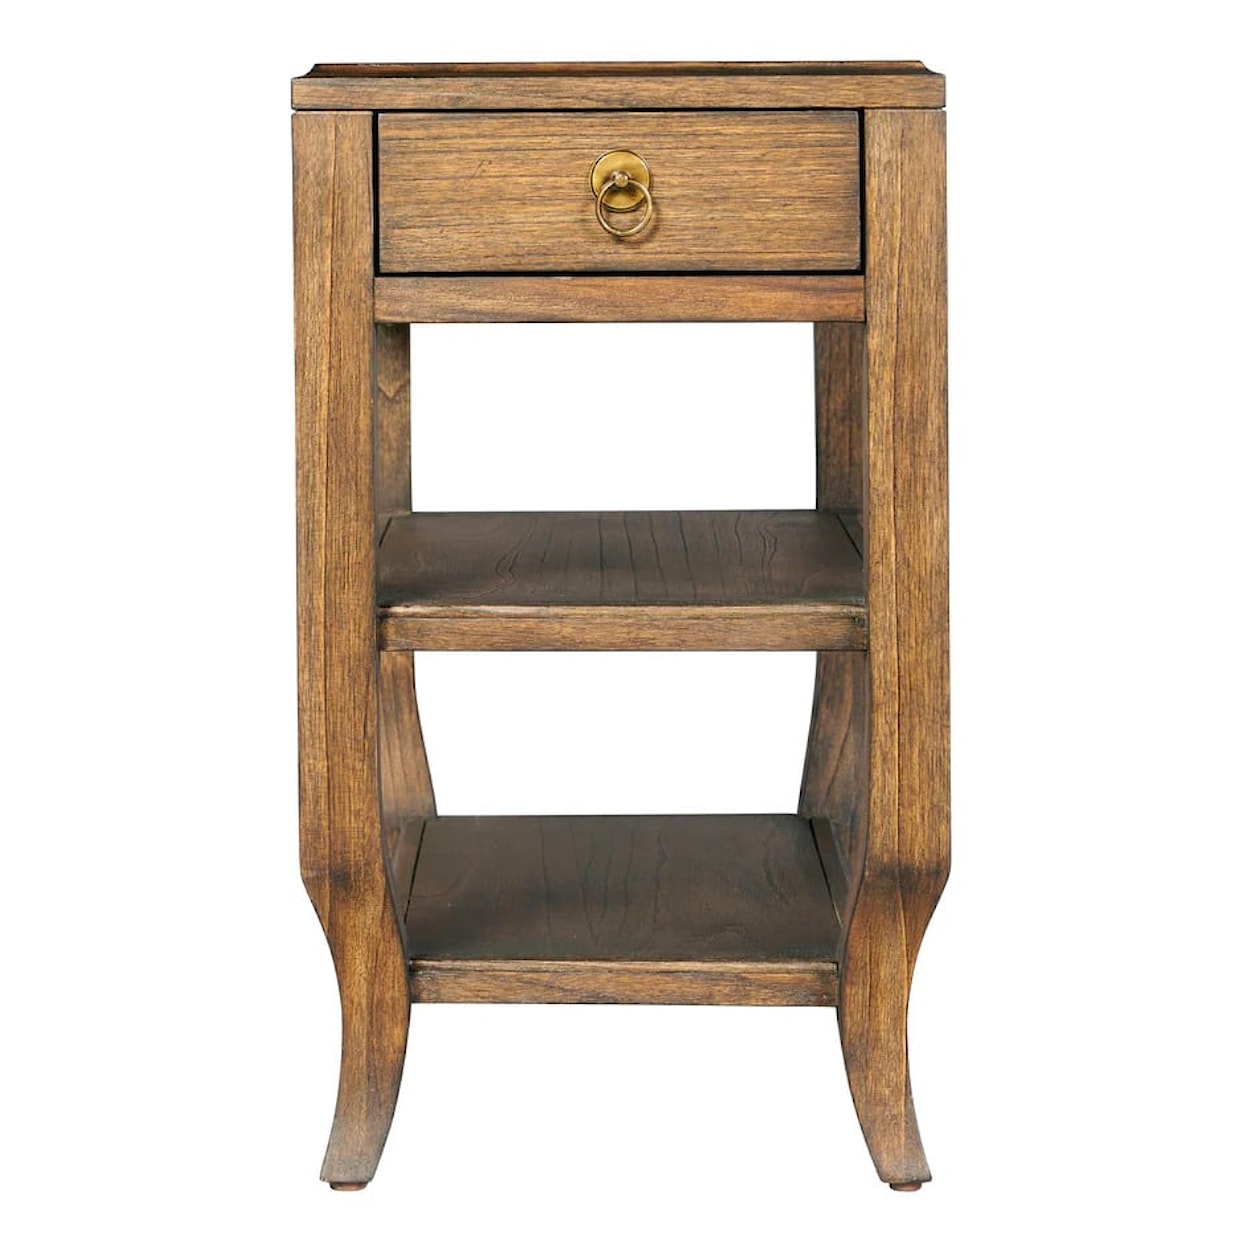 Hekman Accents End Table